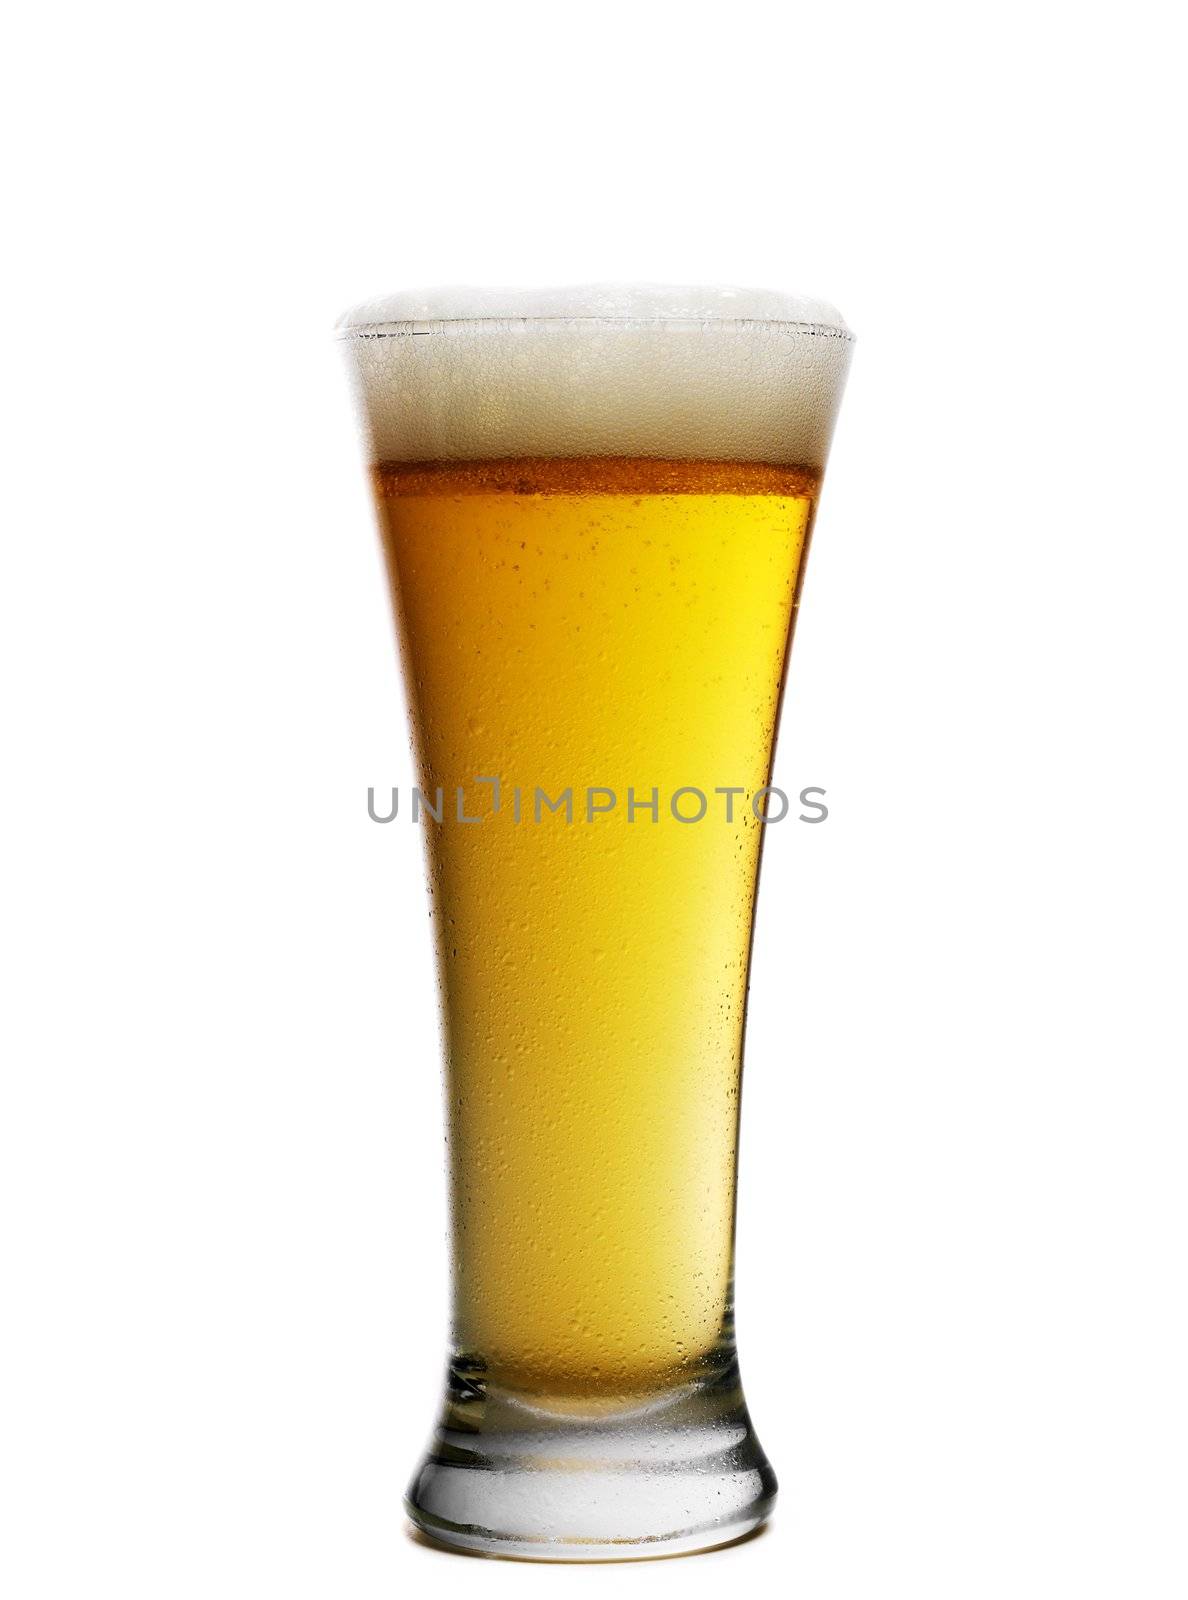 Beer glass by ozaiachin